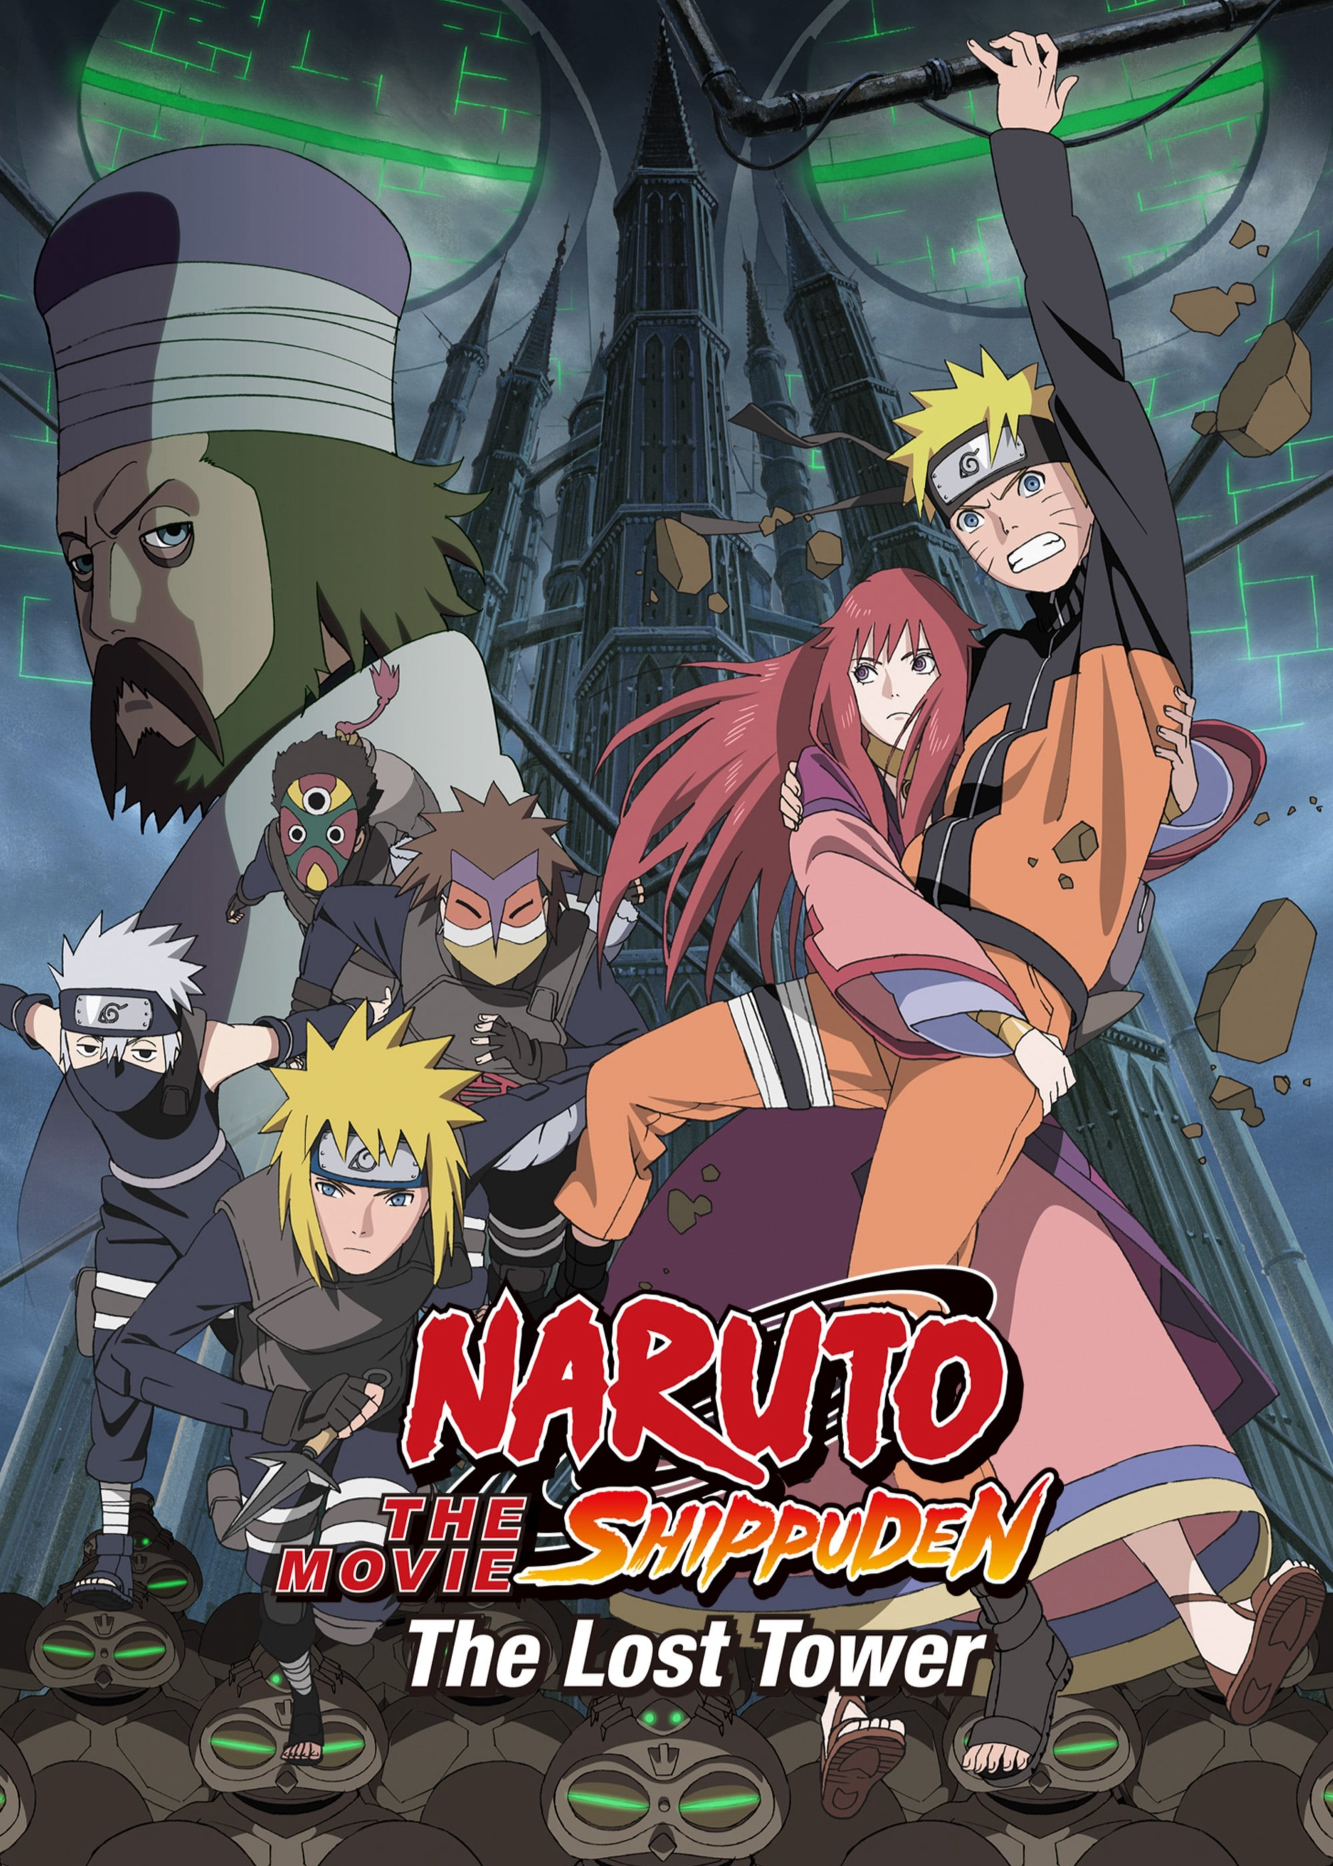 Xem Phim Naruto Shippuden: The Lost Tower (Naruto Shippuden: The Lost Tower)